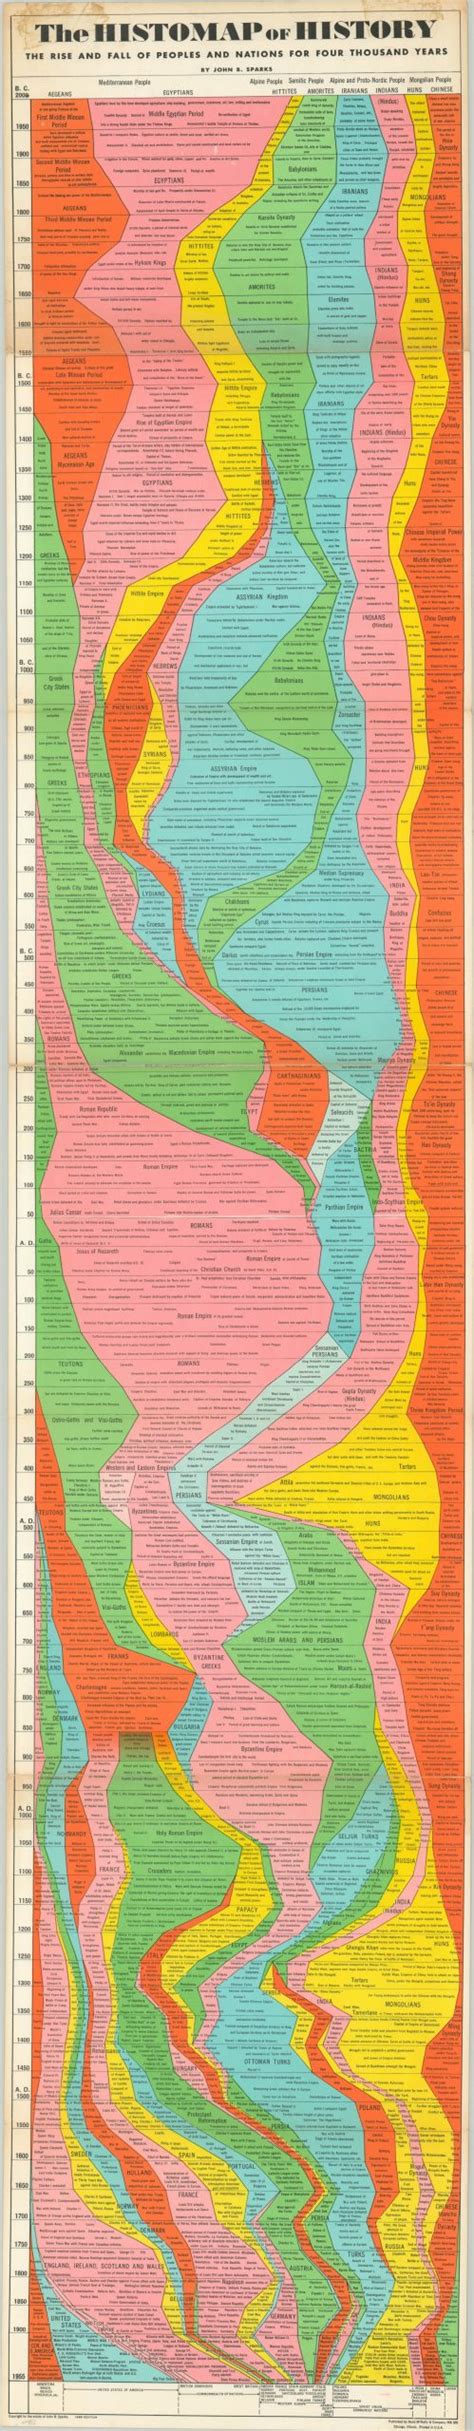 The Histomap of History | Curtis Wright Maps